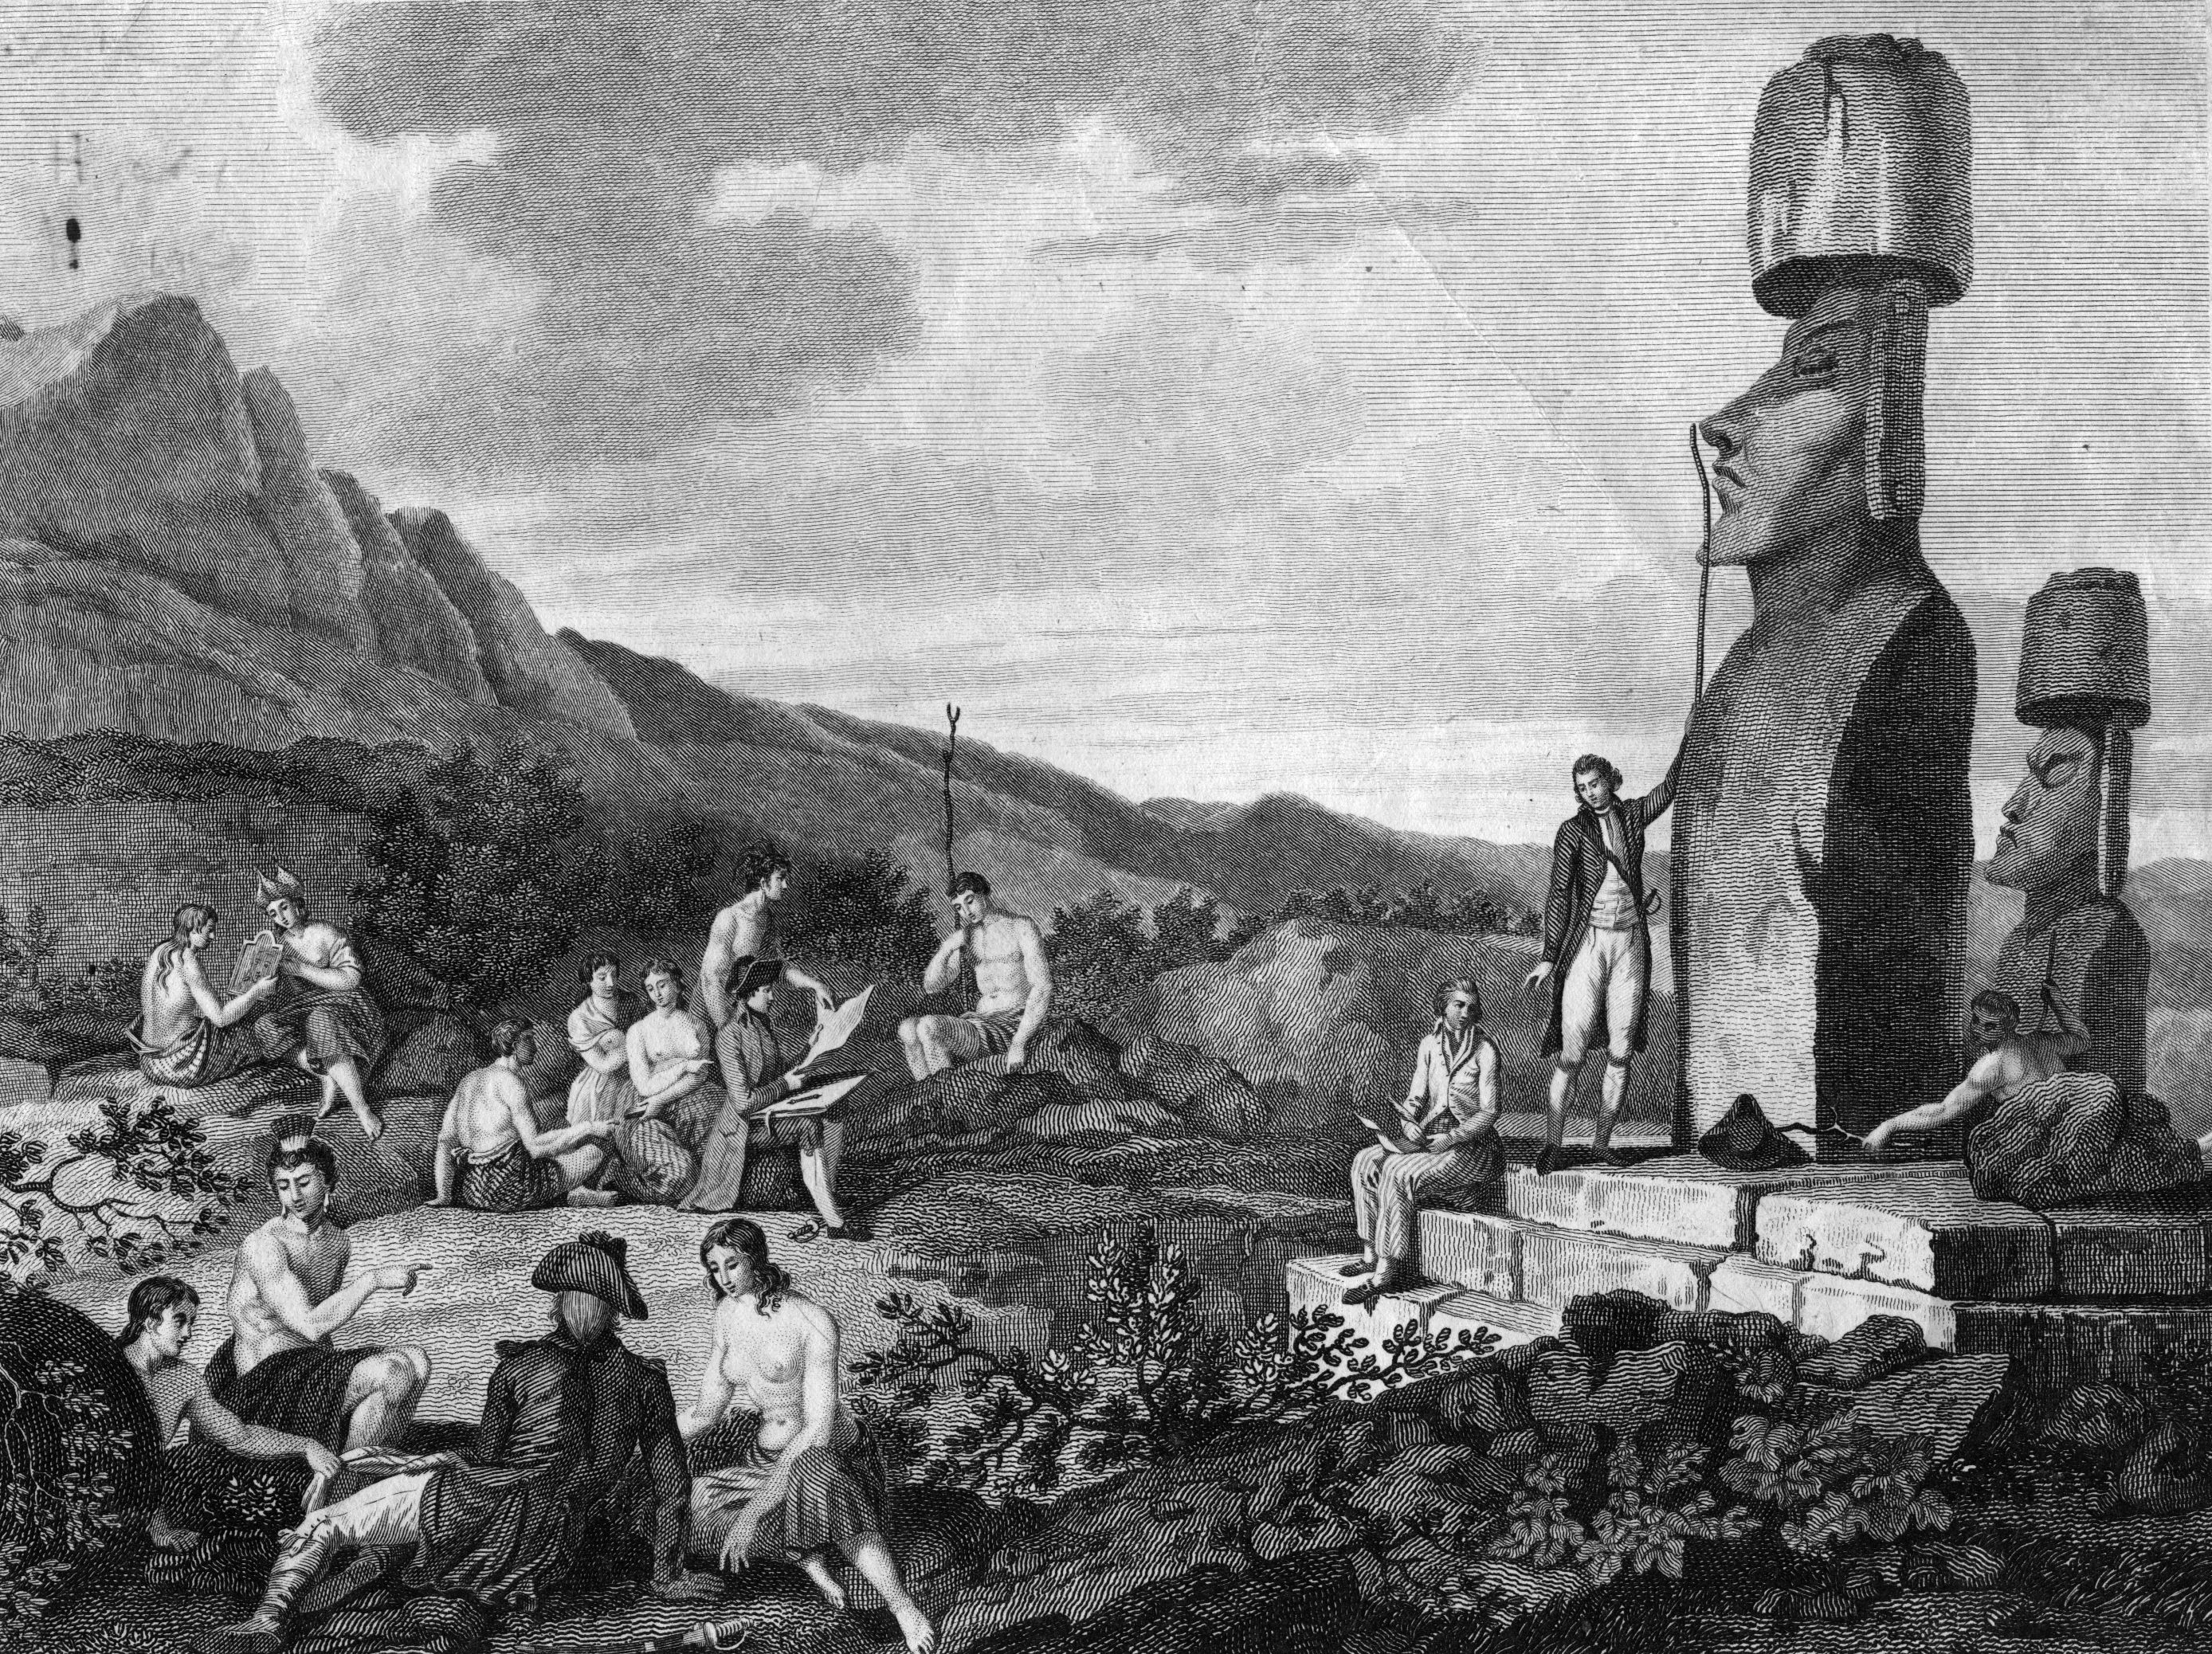 A black-and-white illustration shows a man measuring a large head statue as others lounge among rocks and bushes.